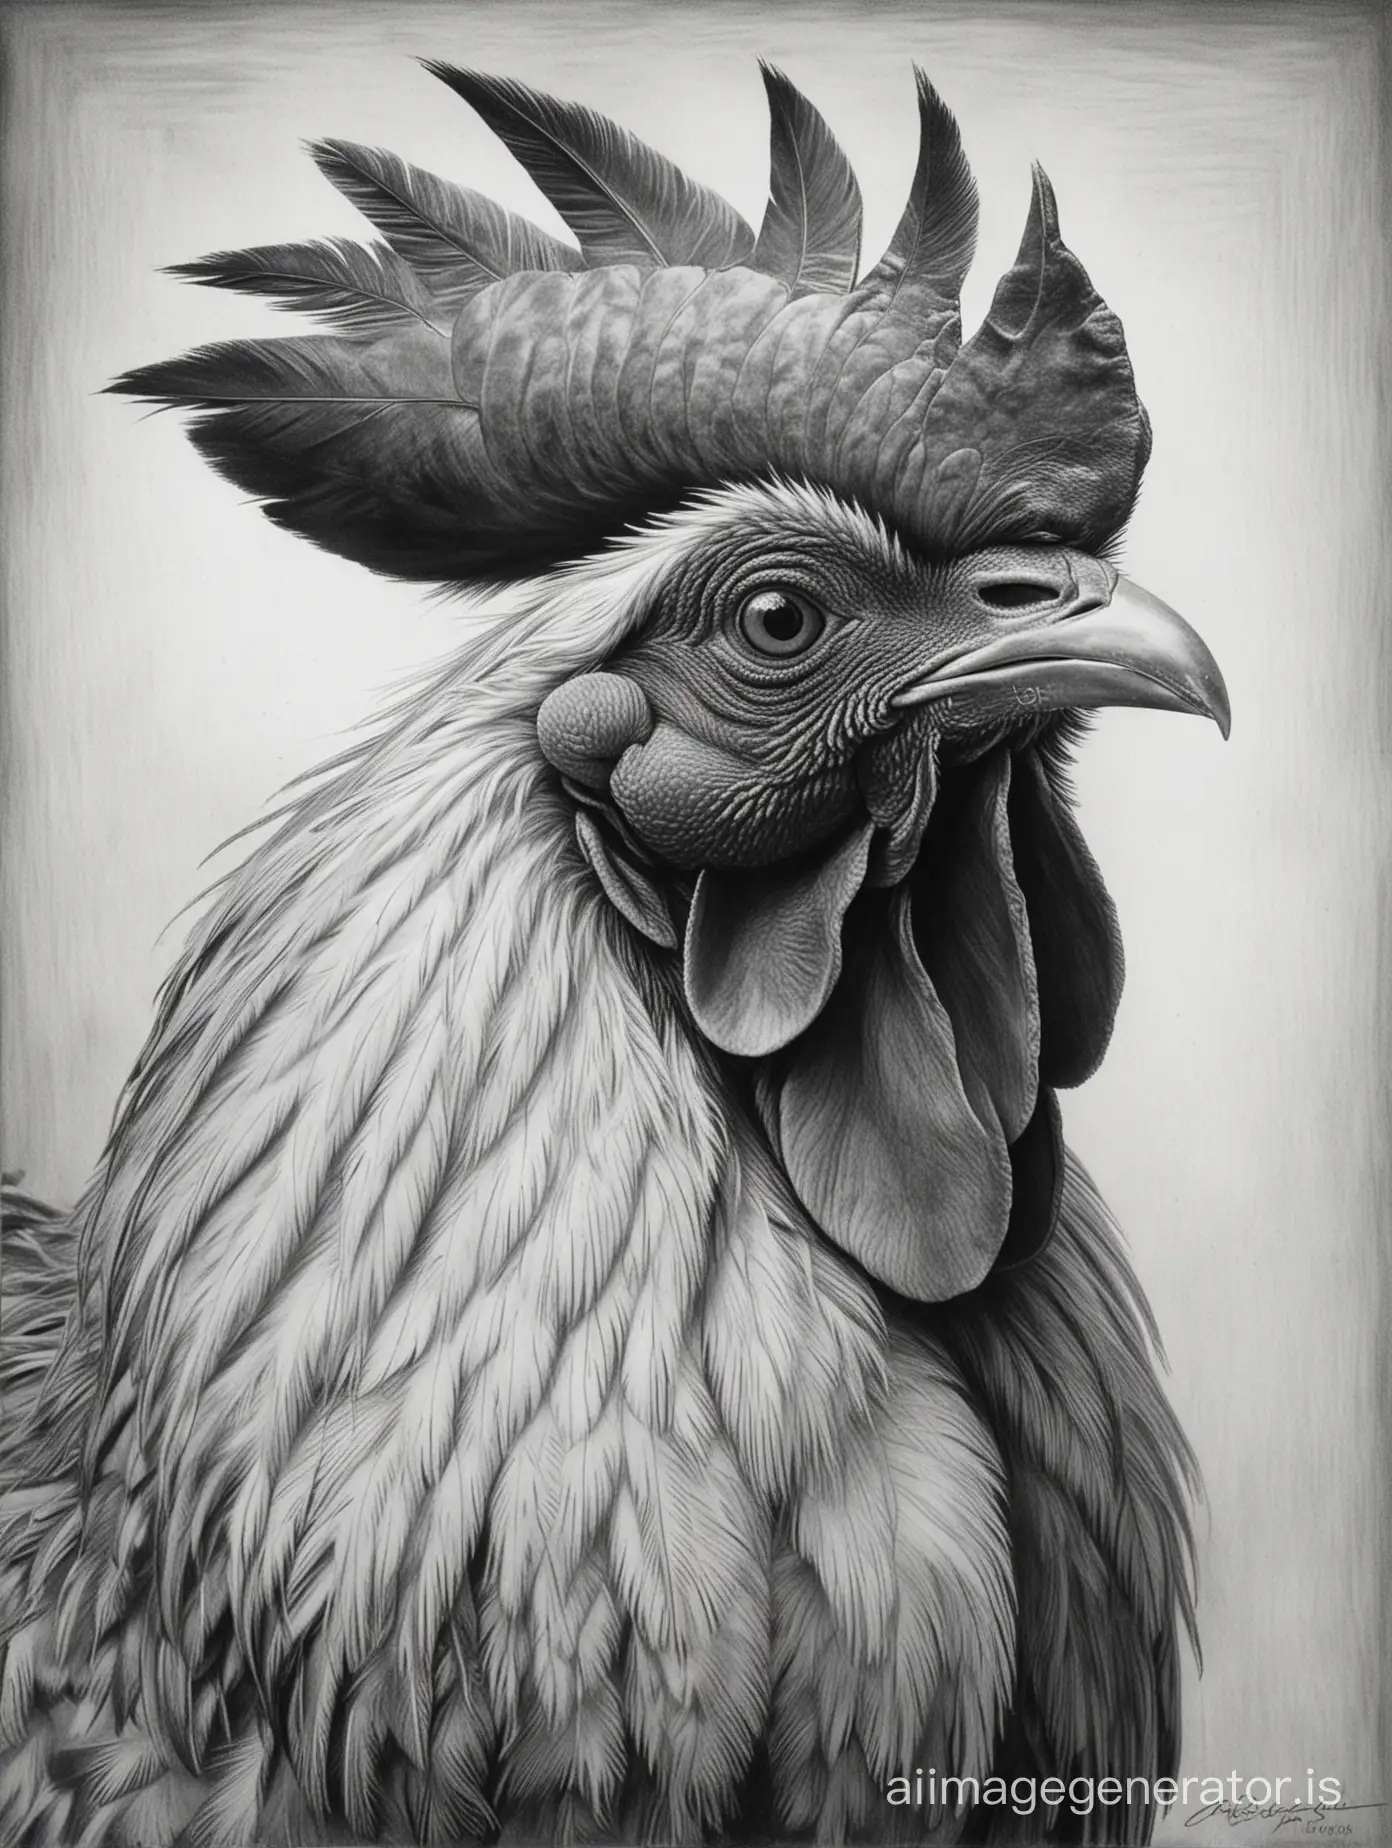 In Picasso's style created an artist's pencil drawing in black and white of a Welsummer Rooster head